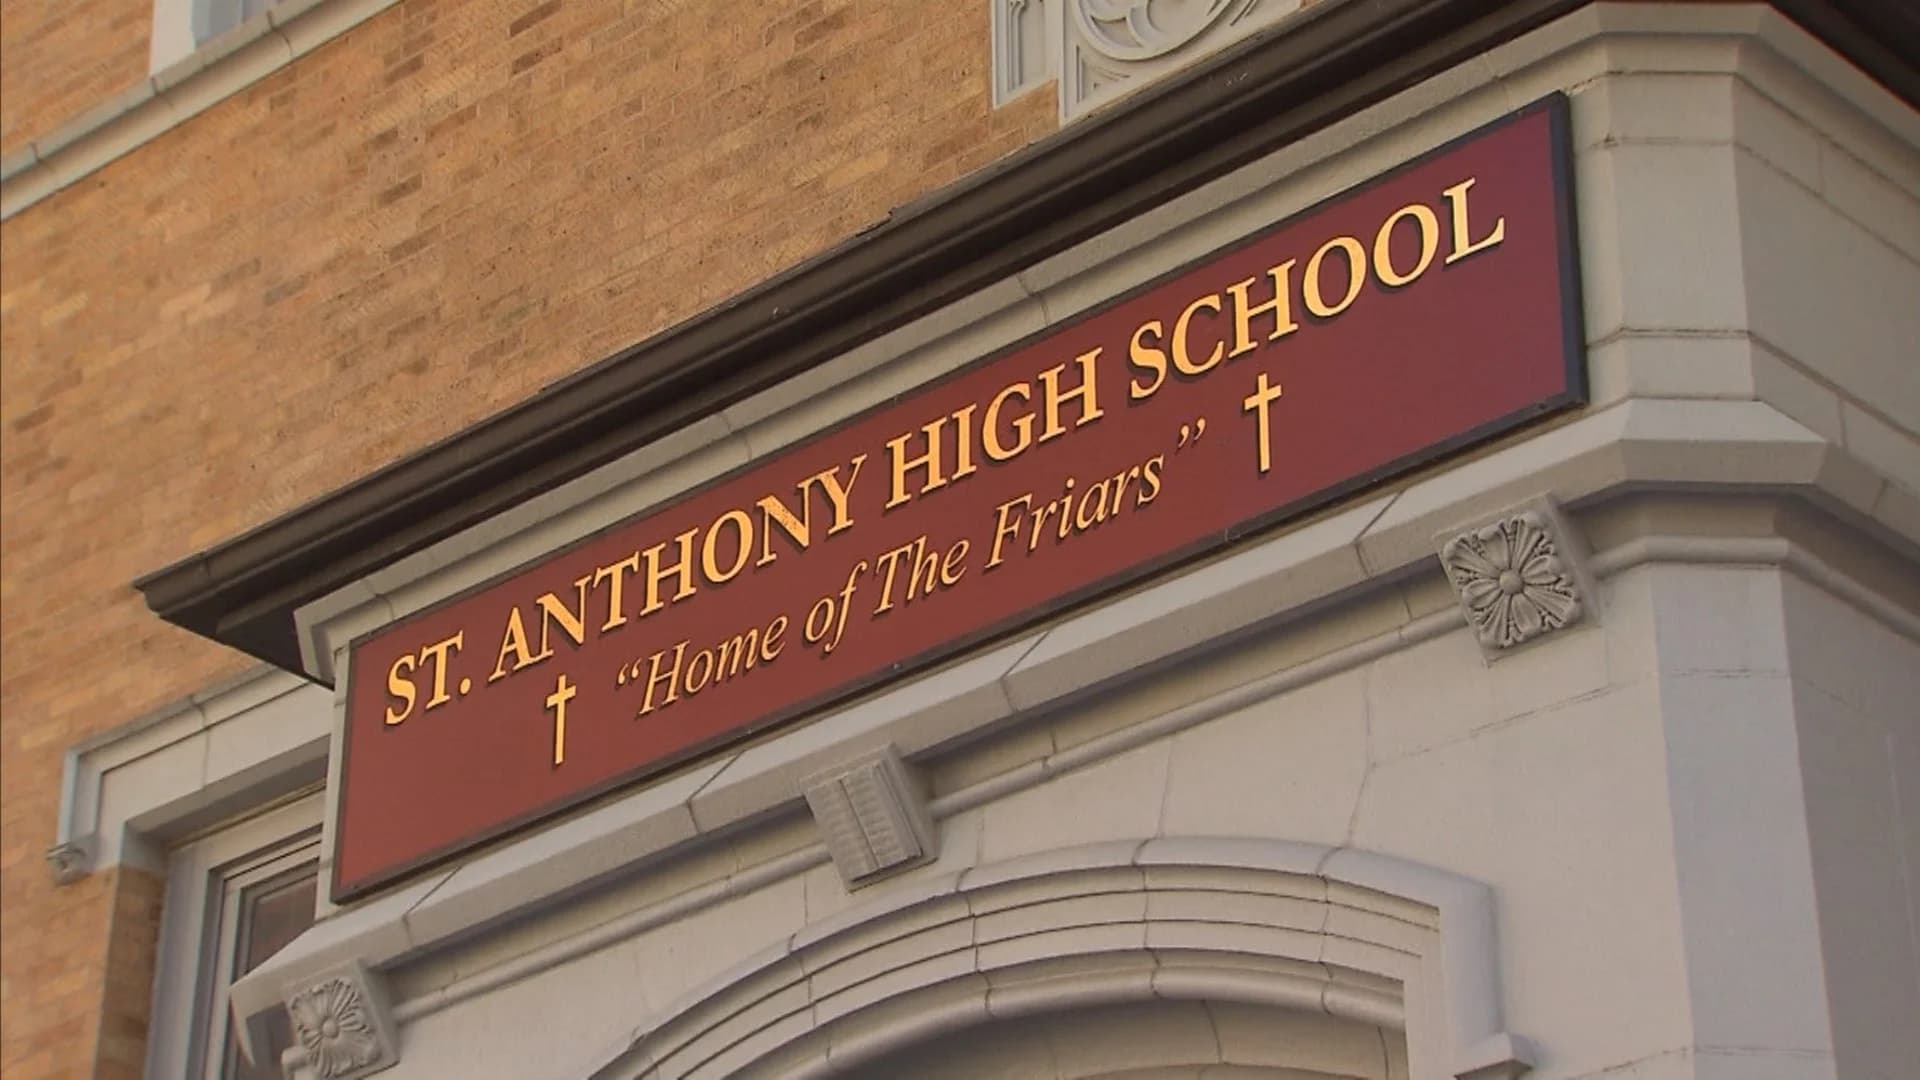 St. Anthony High School in Jersey City to close at end of school year